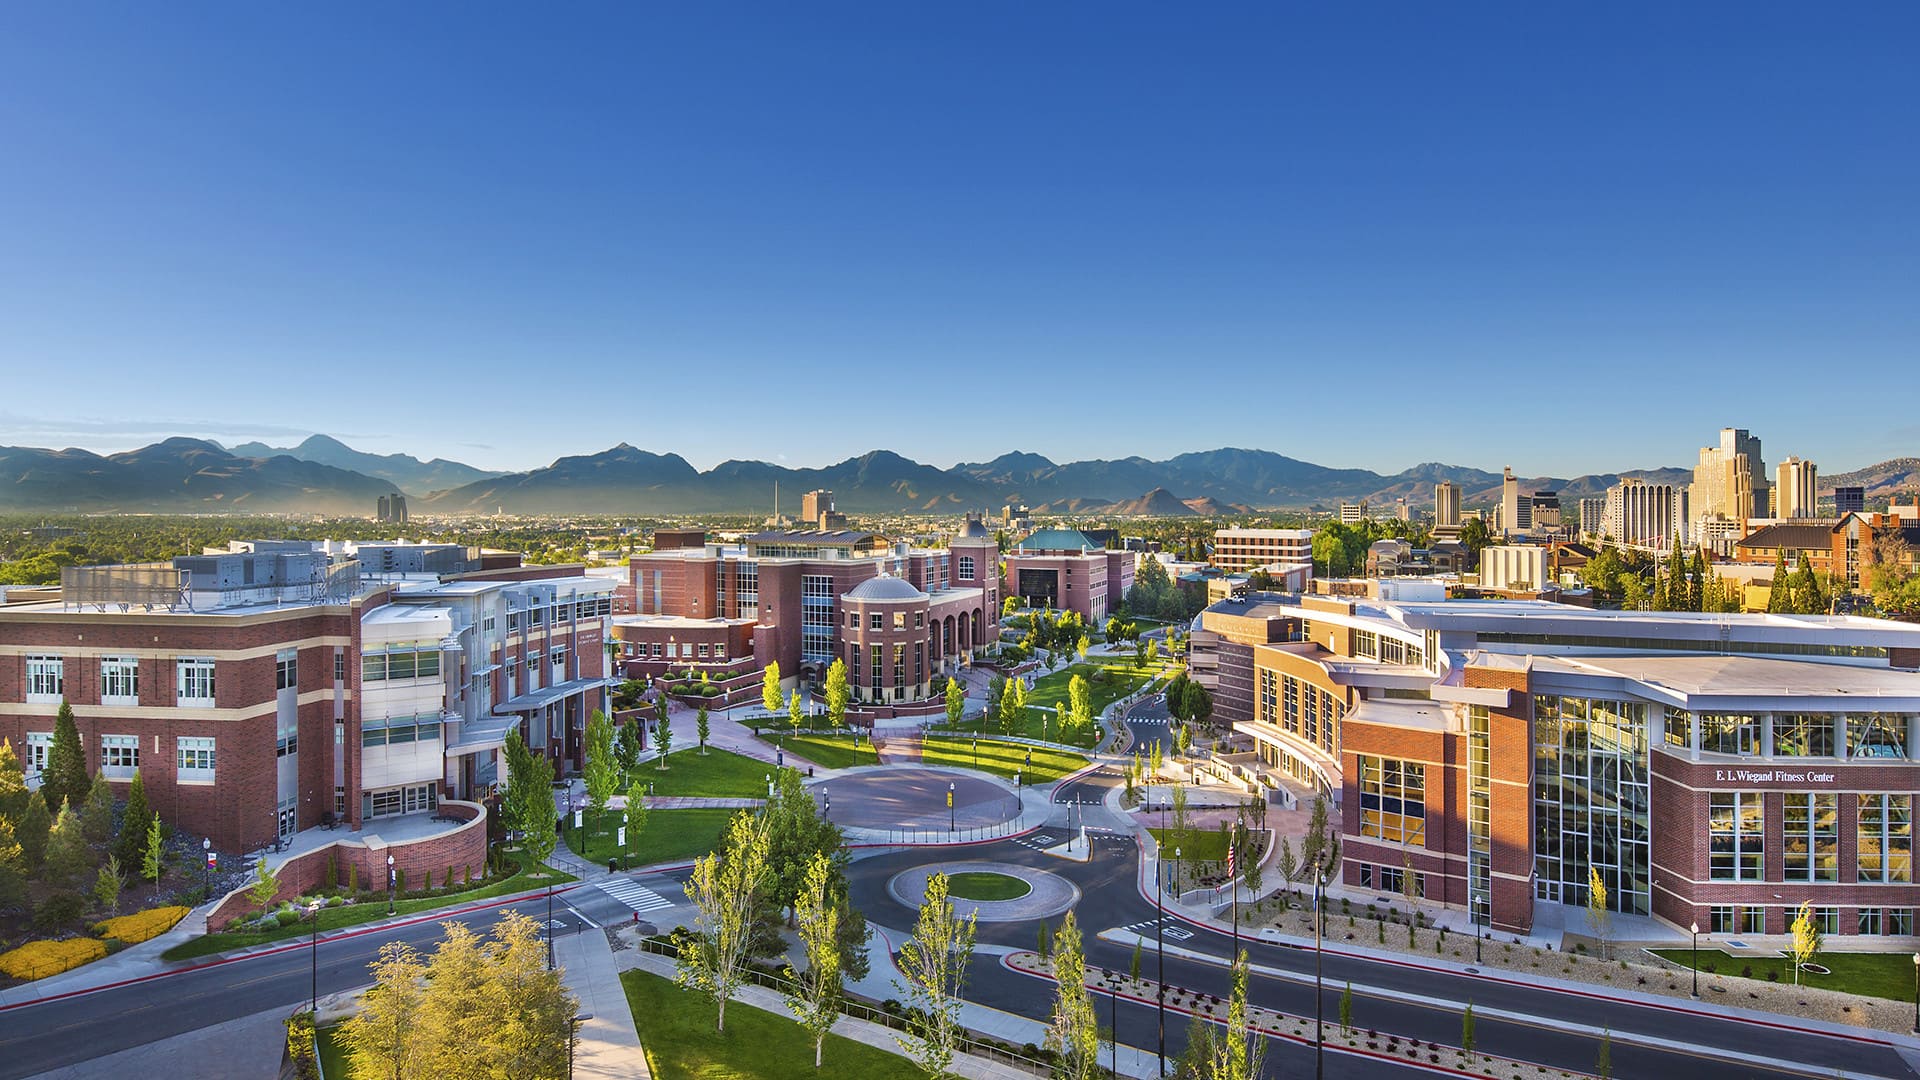 View of campus with downtown Reno in the background